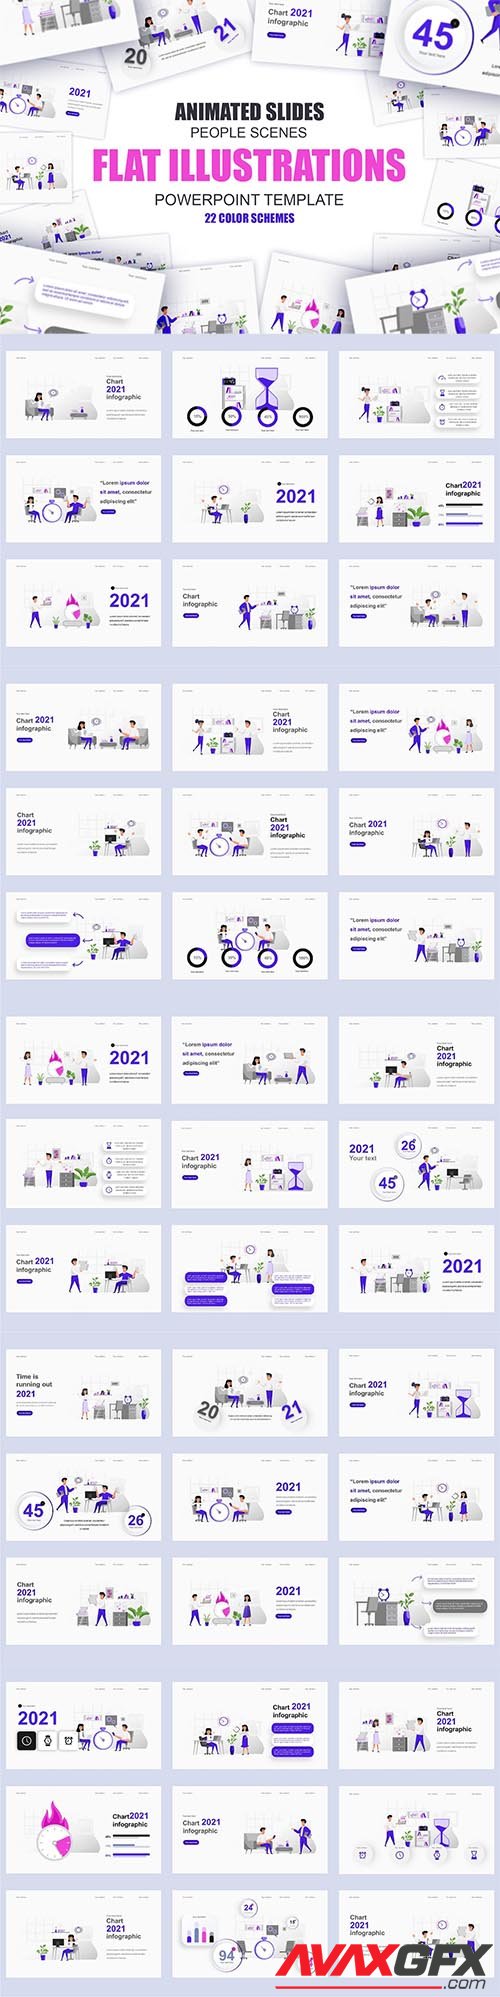 Business Illustration Powerpoint Template